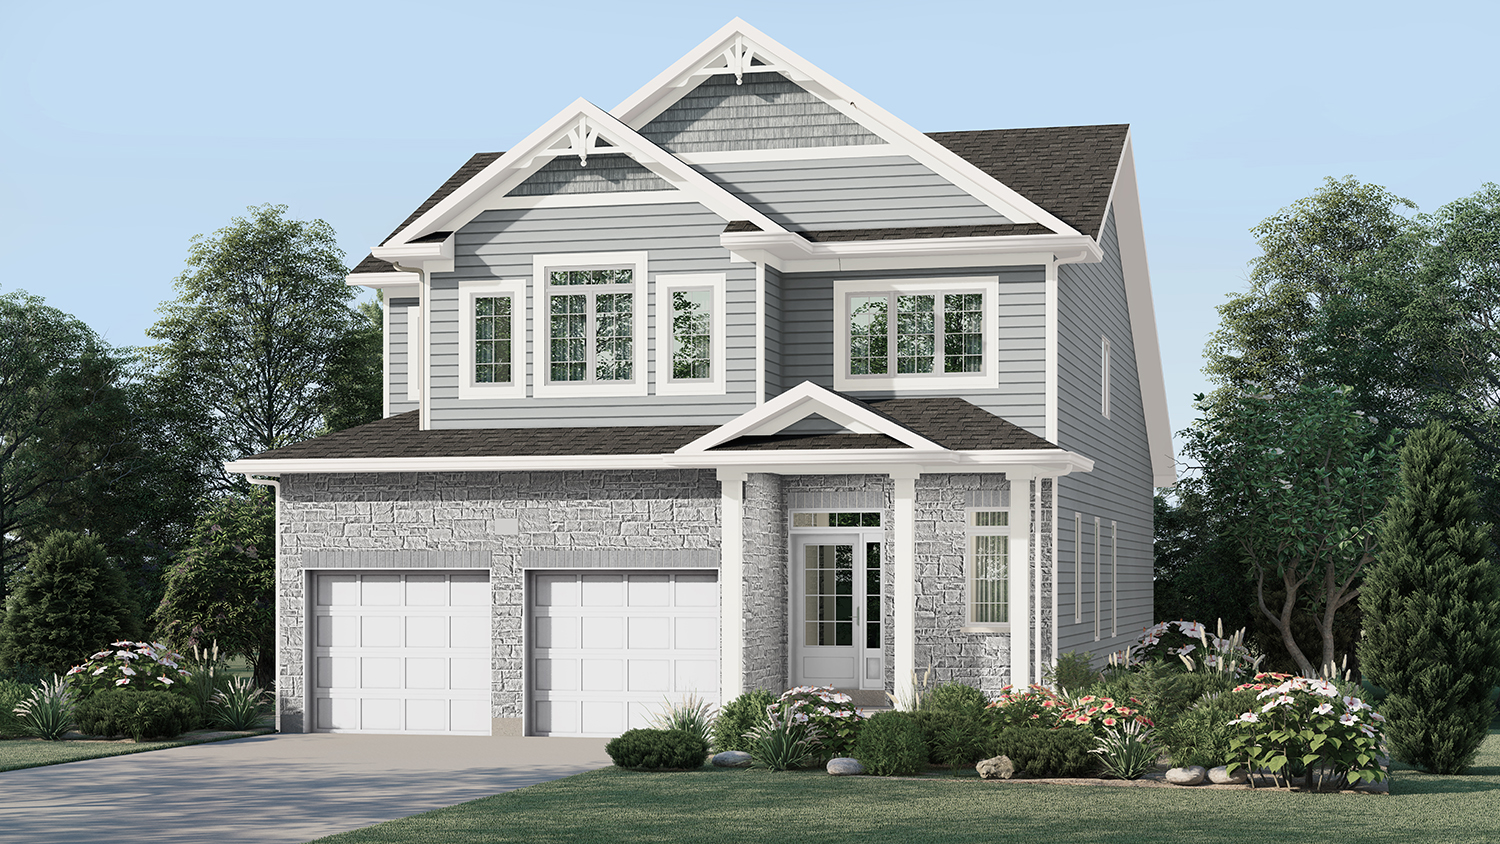 Exterior Rendering - Single Family House - Craigsmere